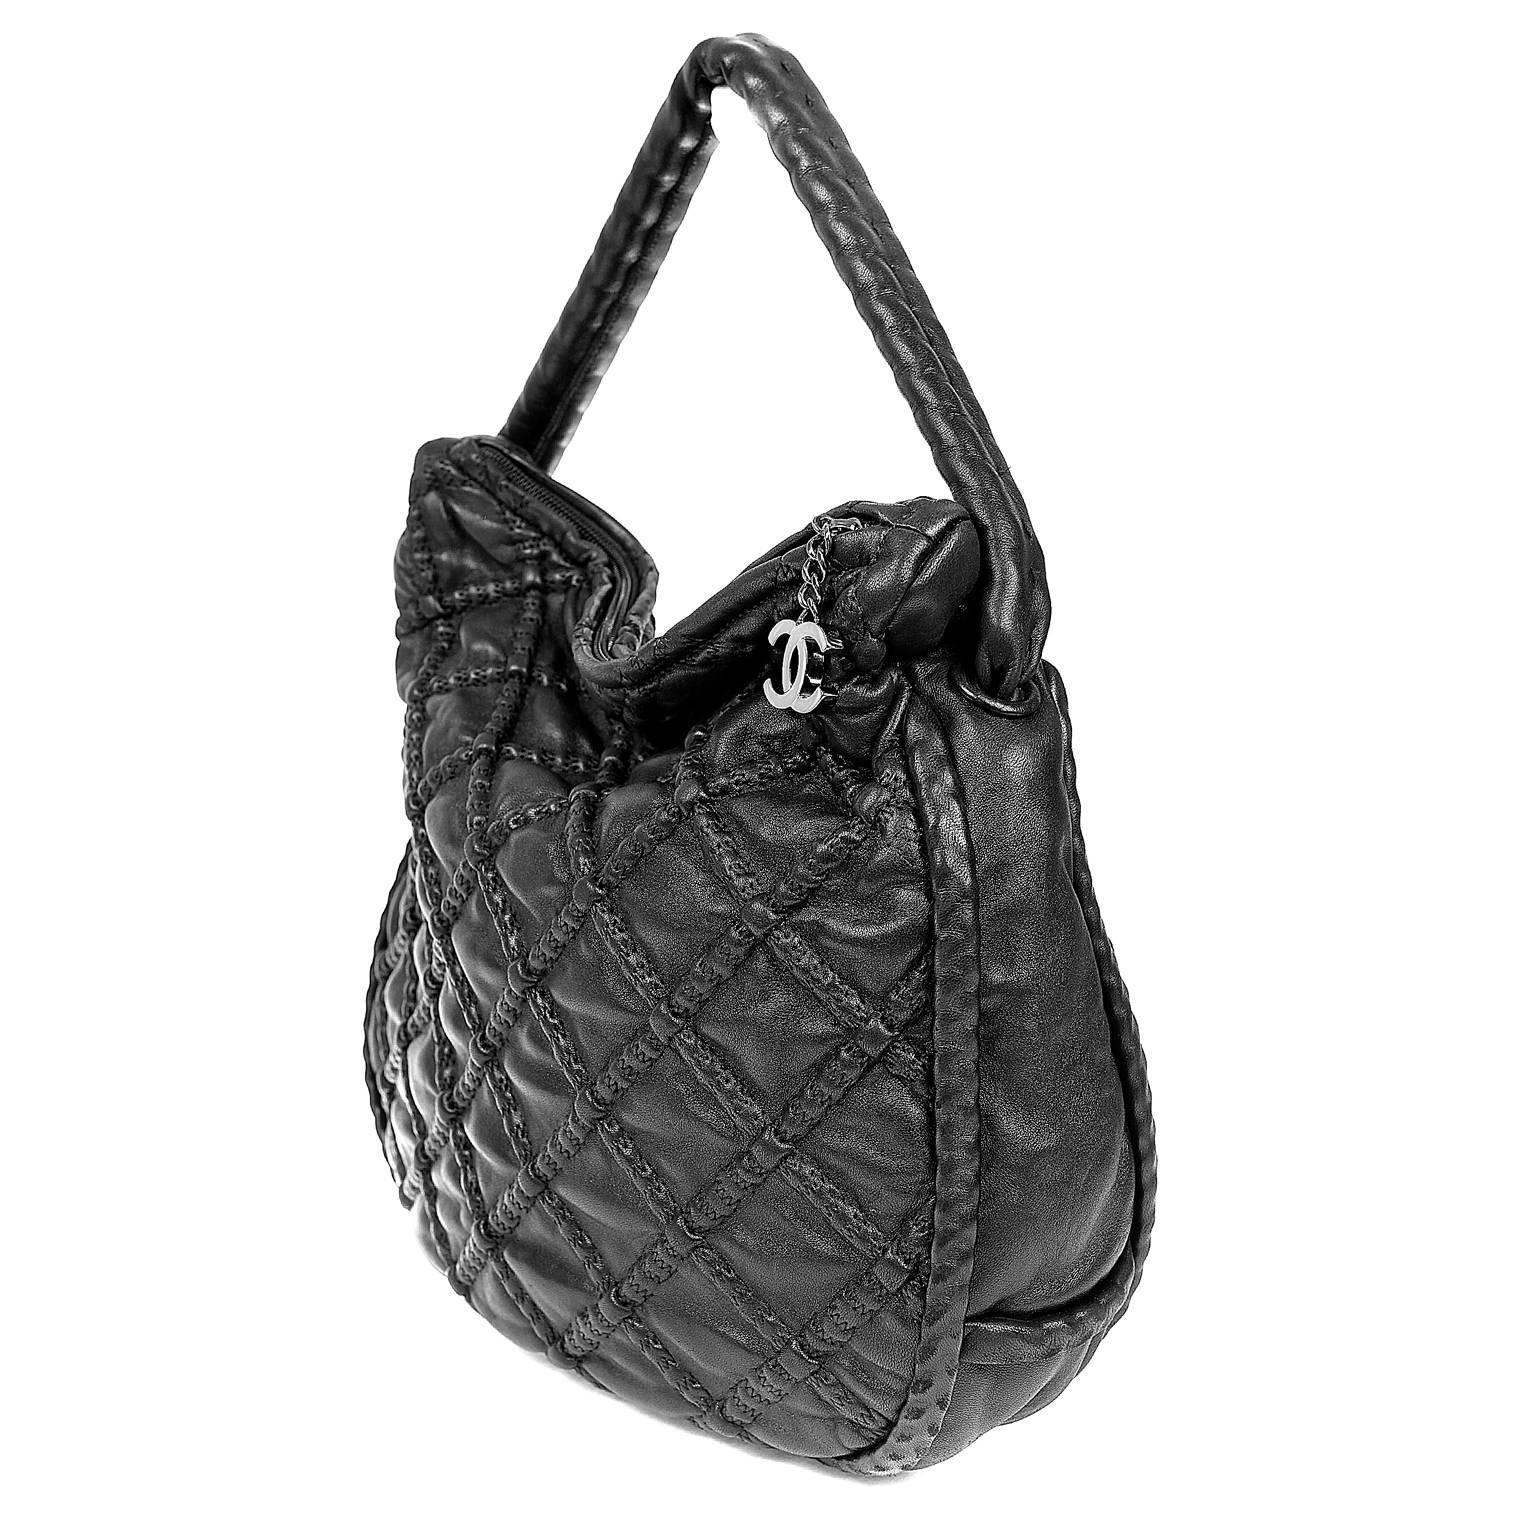 Chanel Black Leather Hidden Chain Hobo- PRISTINE
  Perfect for every day enjoyment, the unique texture adds interest to the back façade. 

Black leather hobo has signature Chanel diamond pattern welting.  Zippered top with silver interlocking CC